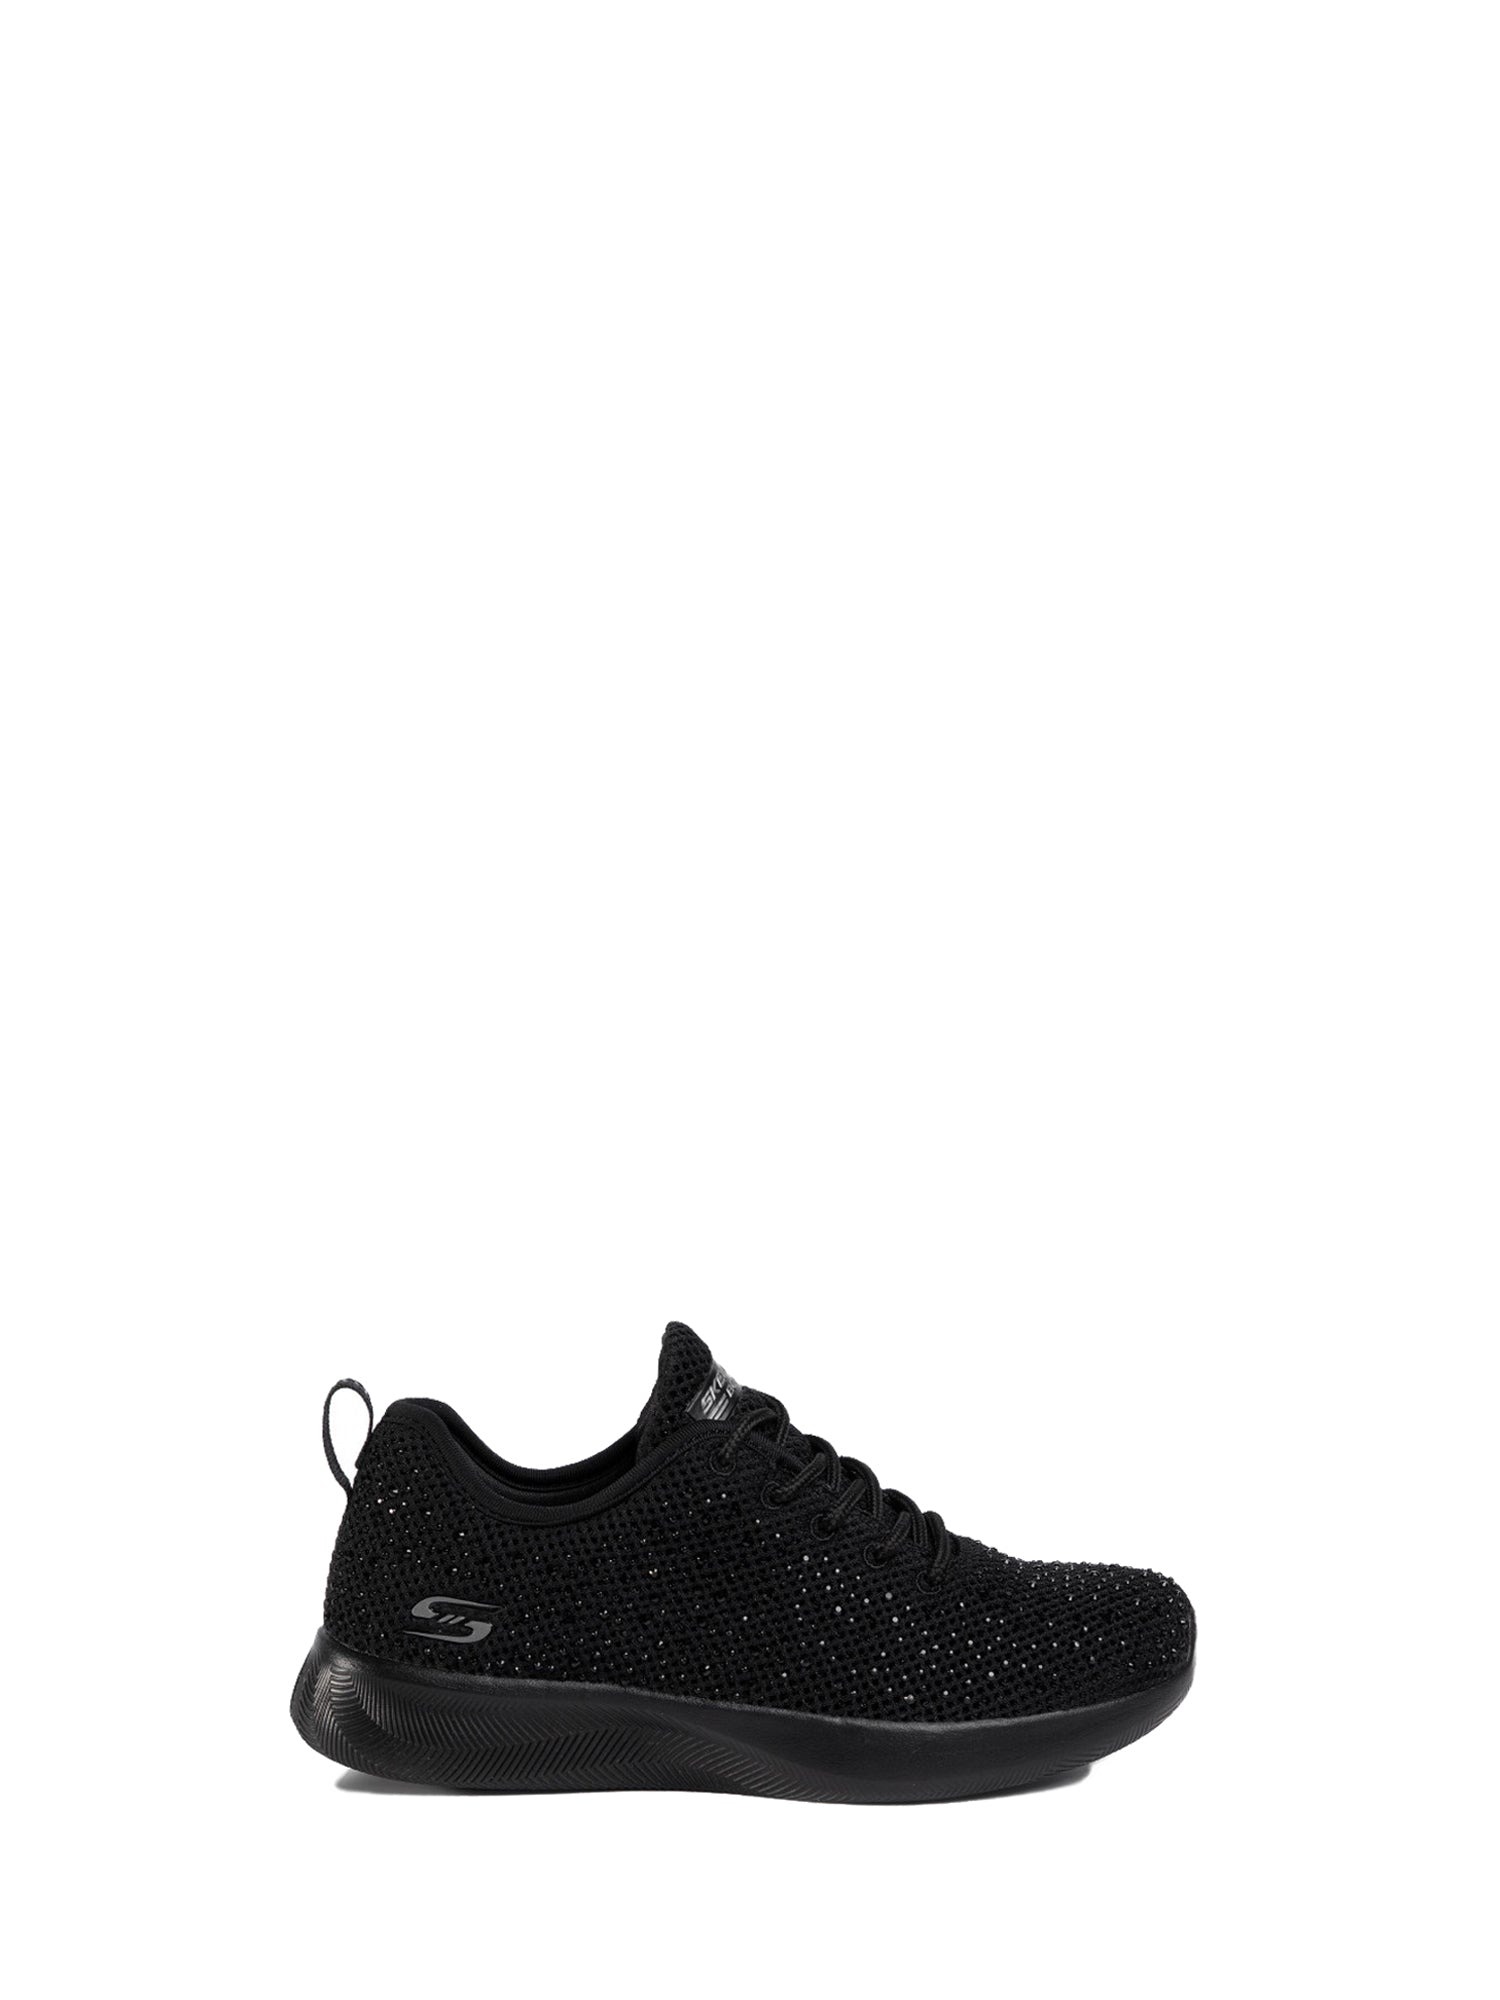 SKECHERS BOBS SQUAD 2 - GALAXY CHASER SNEAKERS NERO